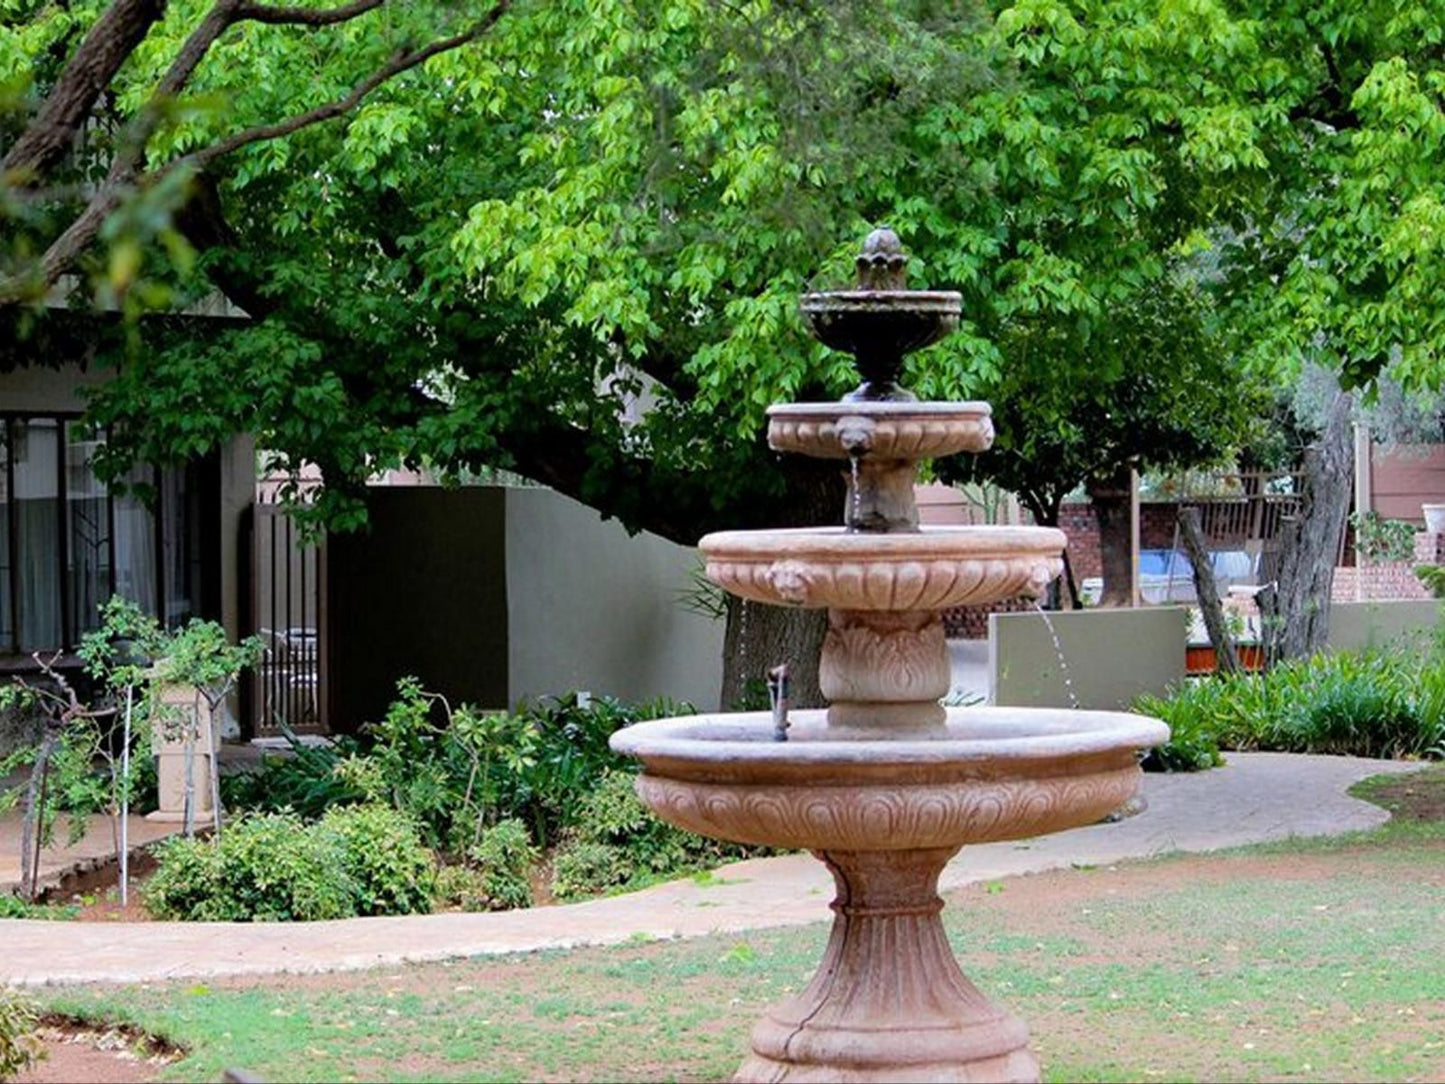 Rusplek Guesthouse Conference Centre And Spa Universitas Bloemfontein Free State South Africa Fountain, Architecture, Garden, Nature, Plant